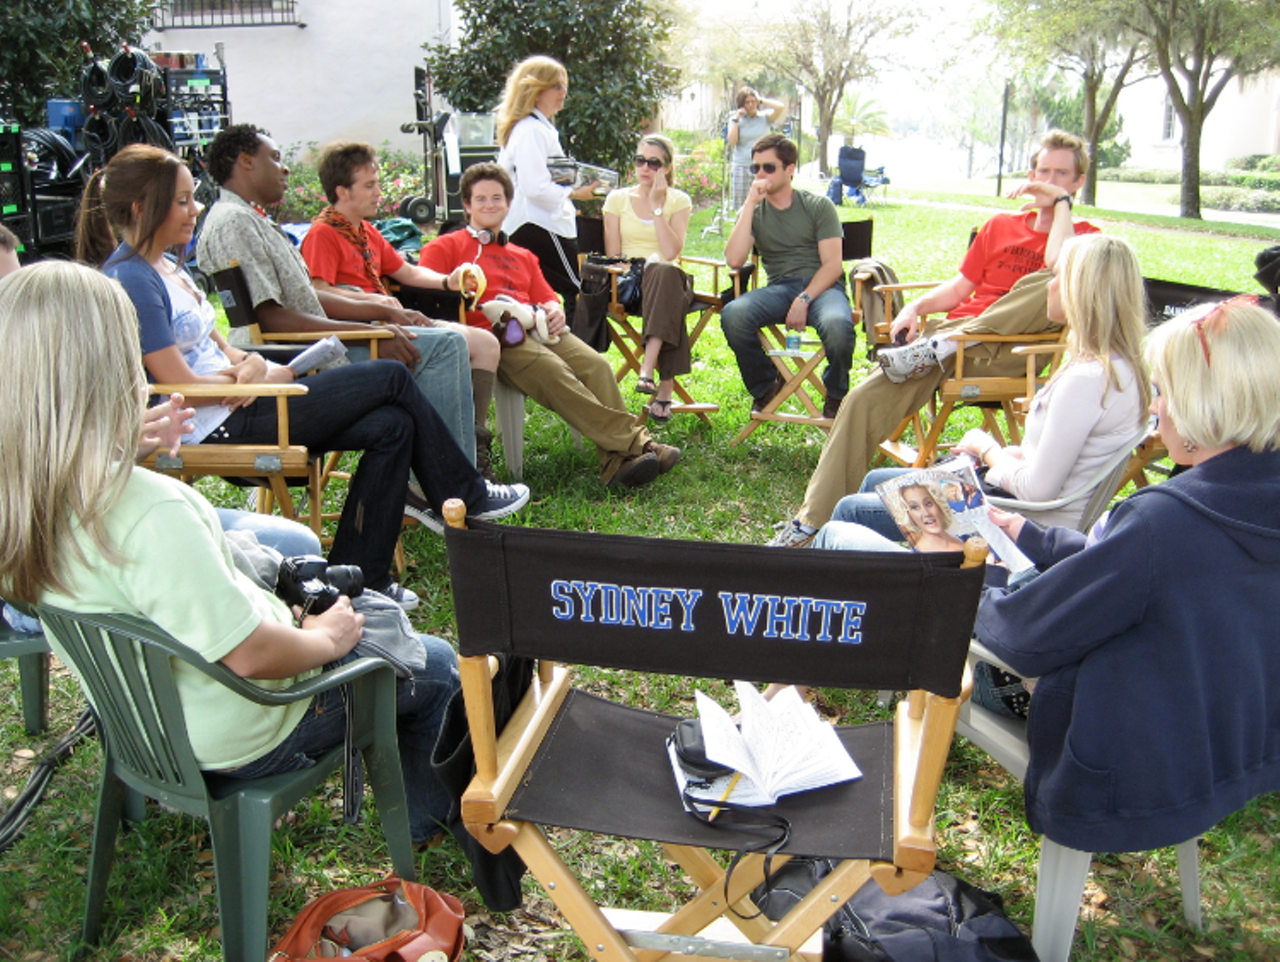 Scenes from "Sydney White," featuring Amanda Bynes, were filmed in Winter Park and at Rollins College.
Photo via Nadine Aveola